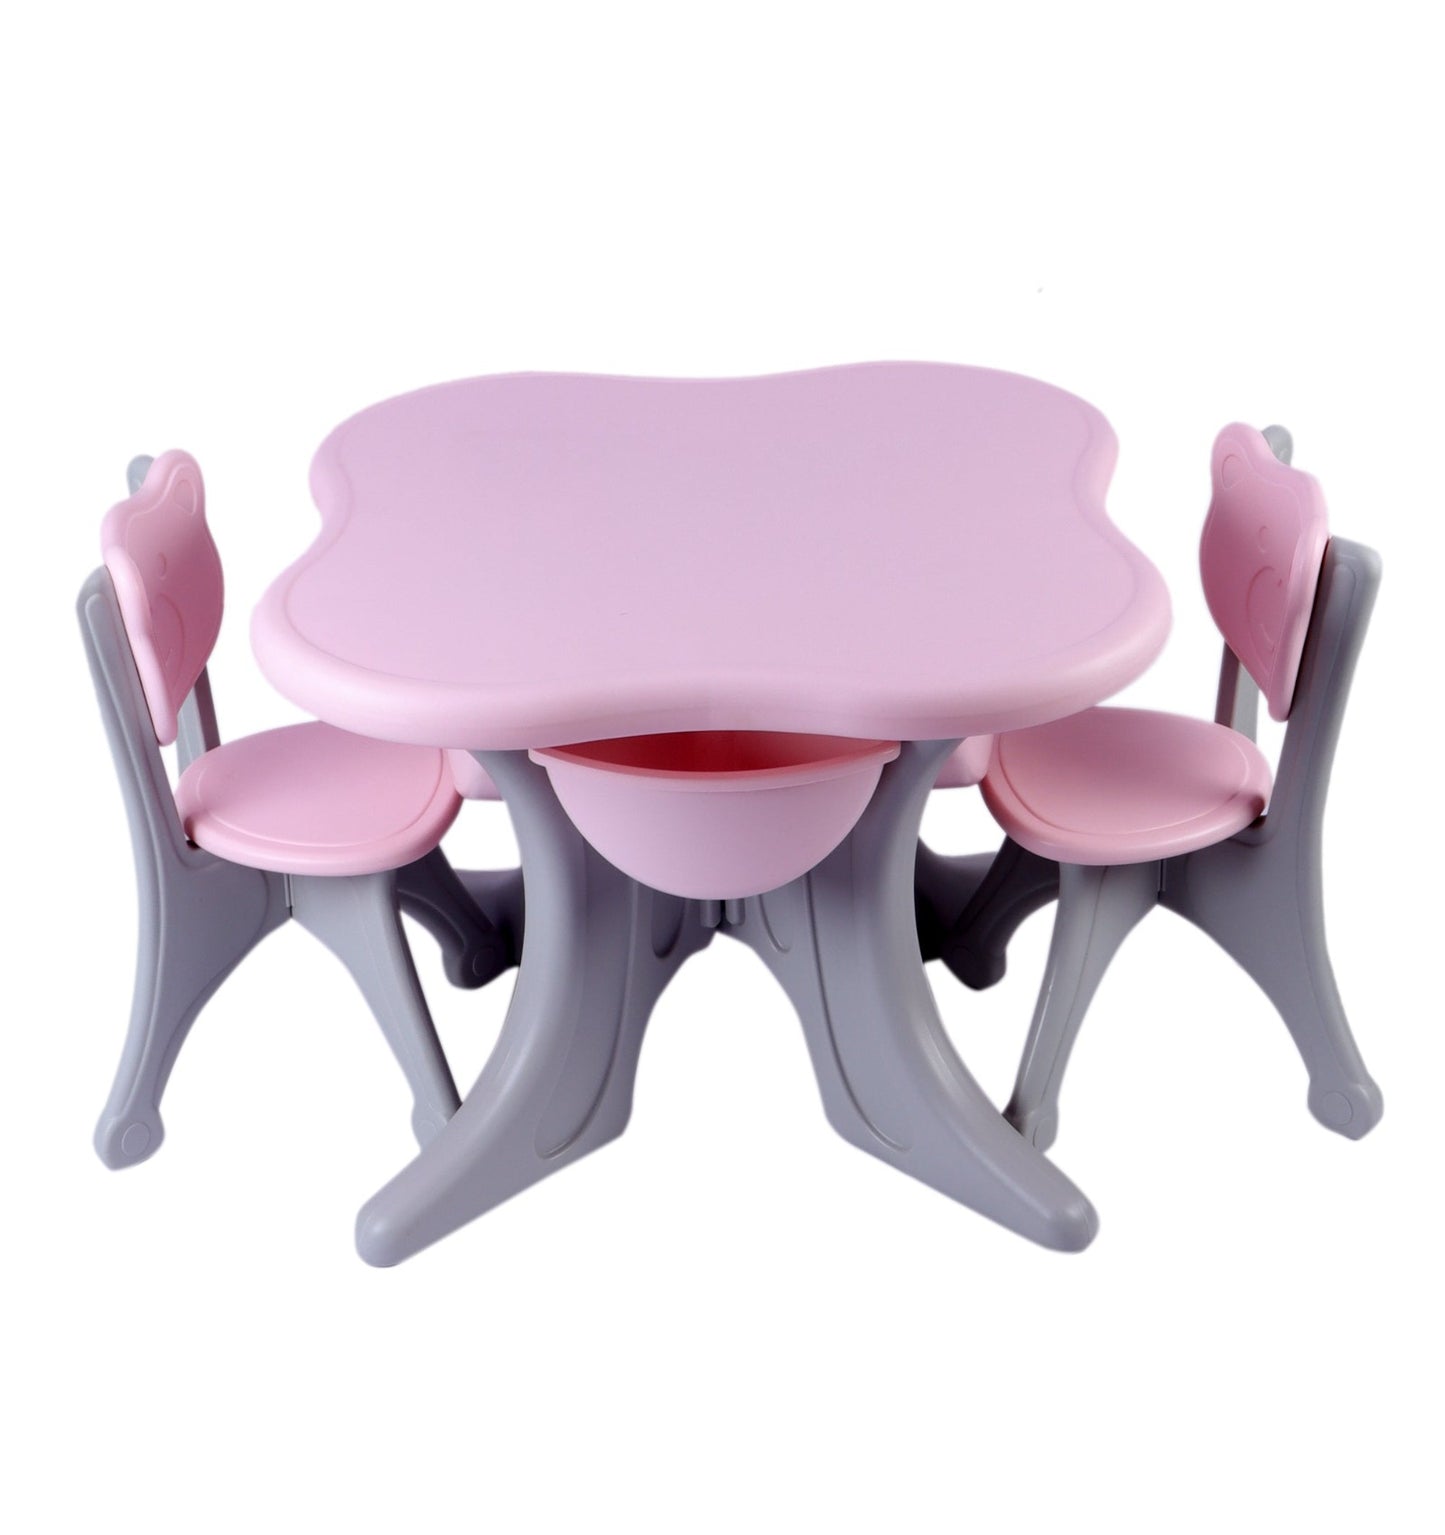 Table & Chair Set With Baskets Pink (2-8 yrs)